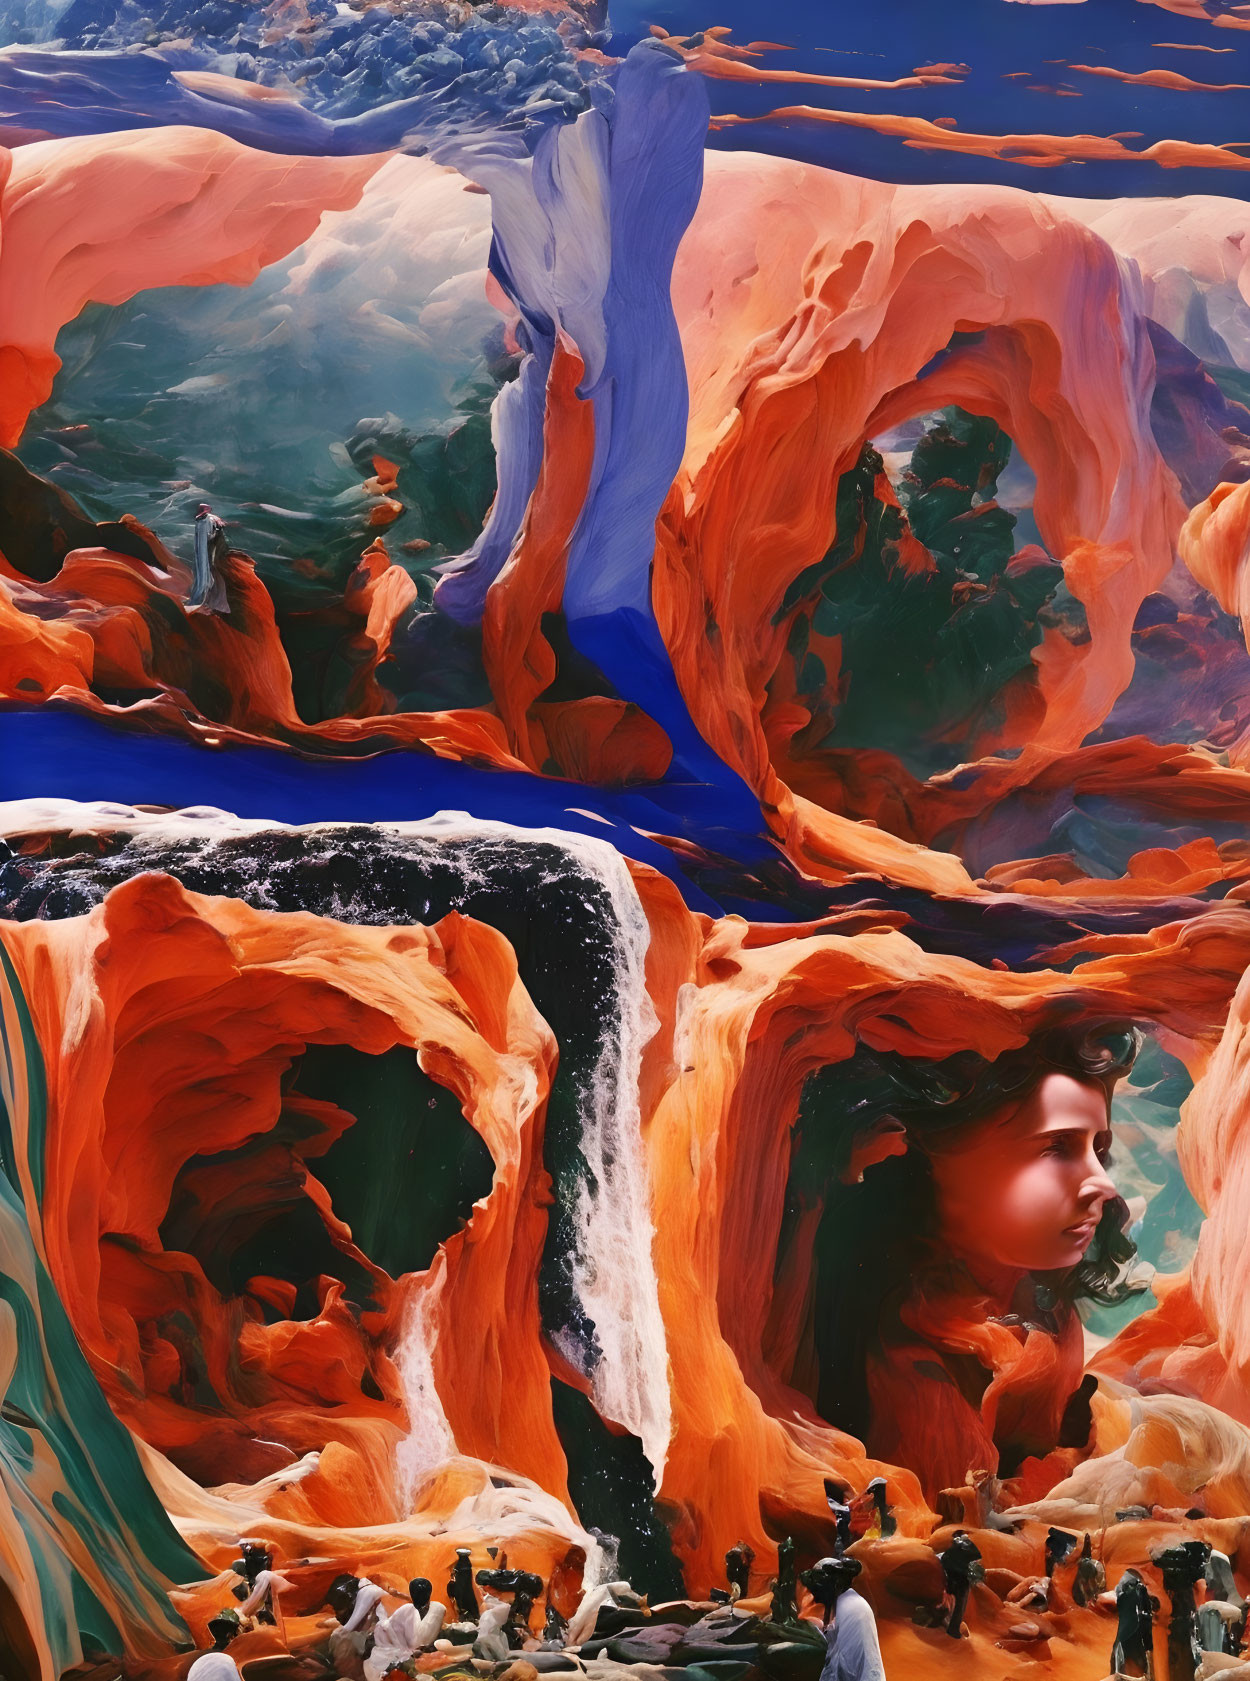 Vivid surreal landscape: waterfall, rocks, ethereal figures, giant's face